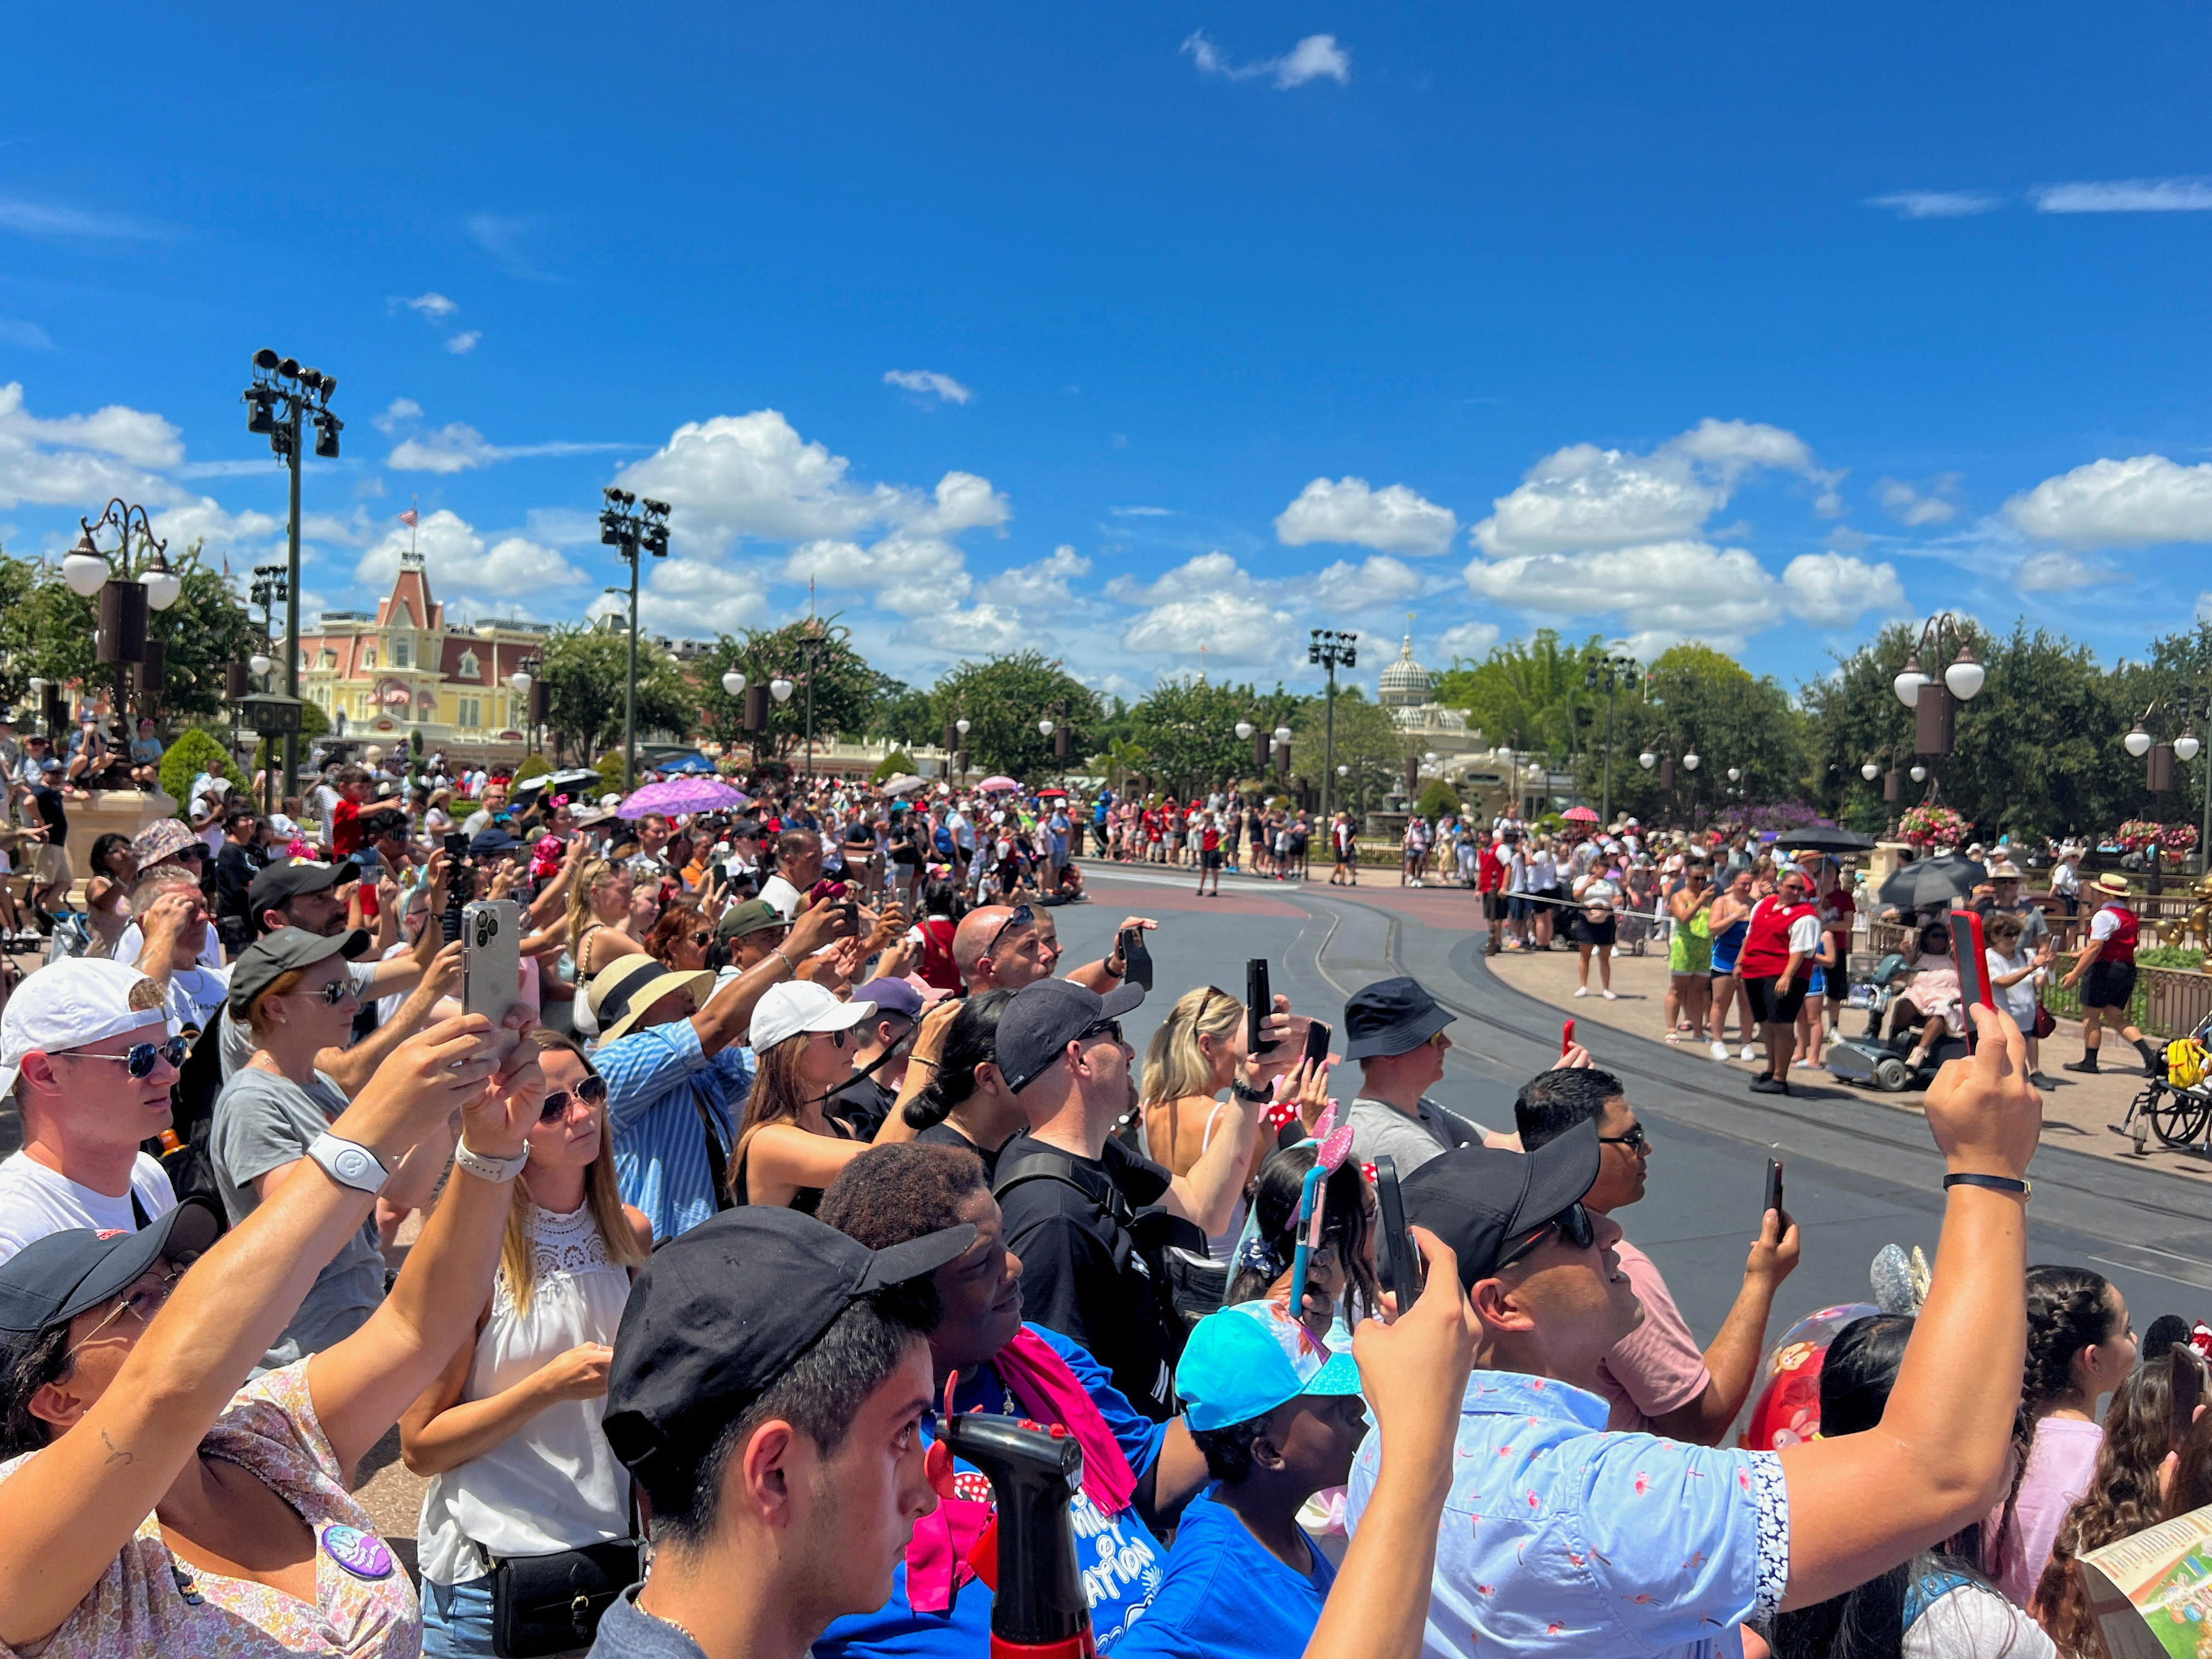 <p>With so many people visiting the park, the best way to get the most bang for your buck is to go during windows when it's least expensive, has the smallest crowds, and ideal weather, according to <a href="https://www.tiktok.com/@disney_beignet?lang=en" rel="noopener nofollow">Jill Knonenborg</a>, who previously spoke to Insider about <a href="https://www.insider.com/best-times-to-visit-disney-according-to-travel-experts-2023-8">the best times to visit Disney</a>.</p><p>While the cheapest times to go are often when school is underway — usually January after Martin Luther King Jr. Day through early February, and early June and late August between summer breaks — that won't be possible for families wanting to keep their kids in class.</p><p>During the summer break, early June is often the most cost effective, Peters said.</p><p>"I think especially for those families that really prioritize education and prioritize school, summer is a good time to go," she said. "The first week of June tends to be a less expensive time to go in the summer, and the heat isn't quite built up to what August would be."</p><p>Late August is also a cheaper time to visit, so that's another option for families whose kids return to class after Labor Day.</p><p>"That late August time is the second-cheapest time I have found with Disney World for this year," <a href="https://www.tiktok.com/@MS4wLjABAAAAWRRiVexTucHJpMnoHc1Q8URmTlSaOITI0upfzLLoDu_gpy6WsHxPKurpsd0AhzOx" rel="noopener nofollow">Amber Travis</a>, a Missouri-based Disney travel agent with Mickey Travels<a href="https://www.tiktok.com/@MS4wLjABAAAAWRRiVexTucHJpMnoHc1Q8URmTlSaOITI0upfzLLoDu_gpy6WsHxPKurpsd0AhzOx" rel="noopener nofollow">,</a> told Insider.</p><p>"Disney offers lower rates at that time to get people to go," she said.</p><p>But if you want to experience the Halloween decor and the early days of Christmas festivities without the chaotic crowds and crazy prices, September and early December are the best times to go.</p>